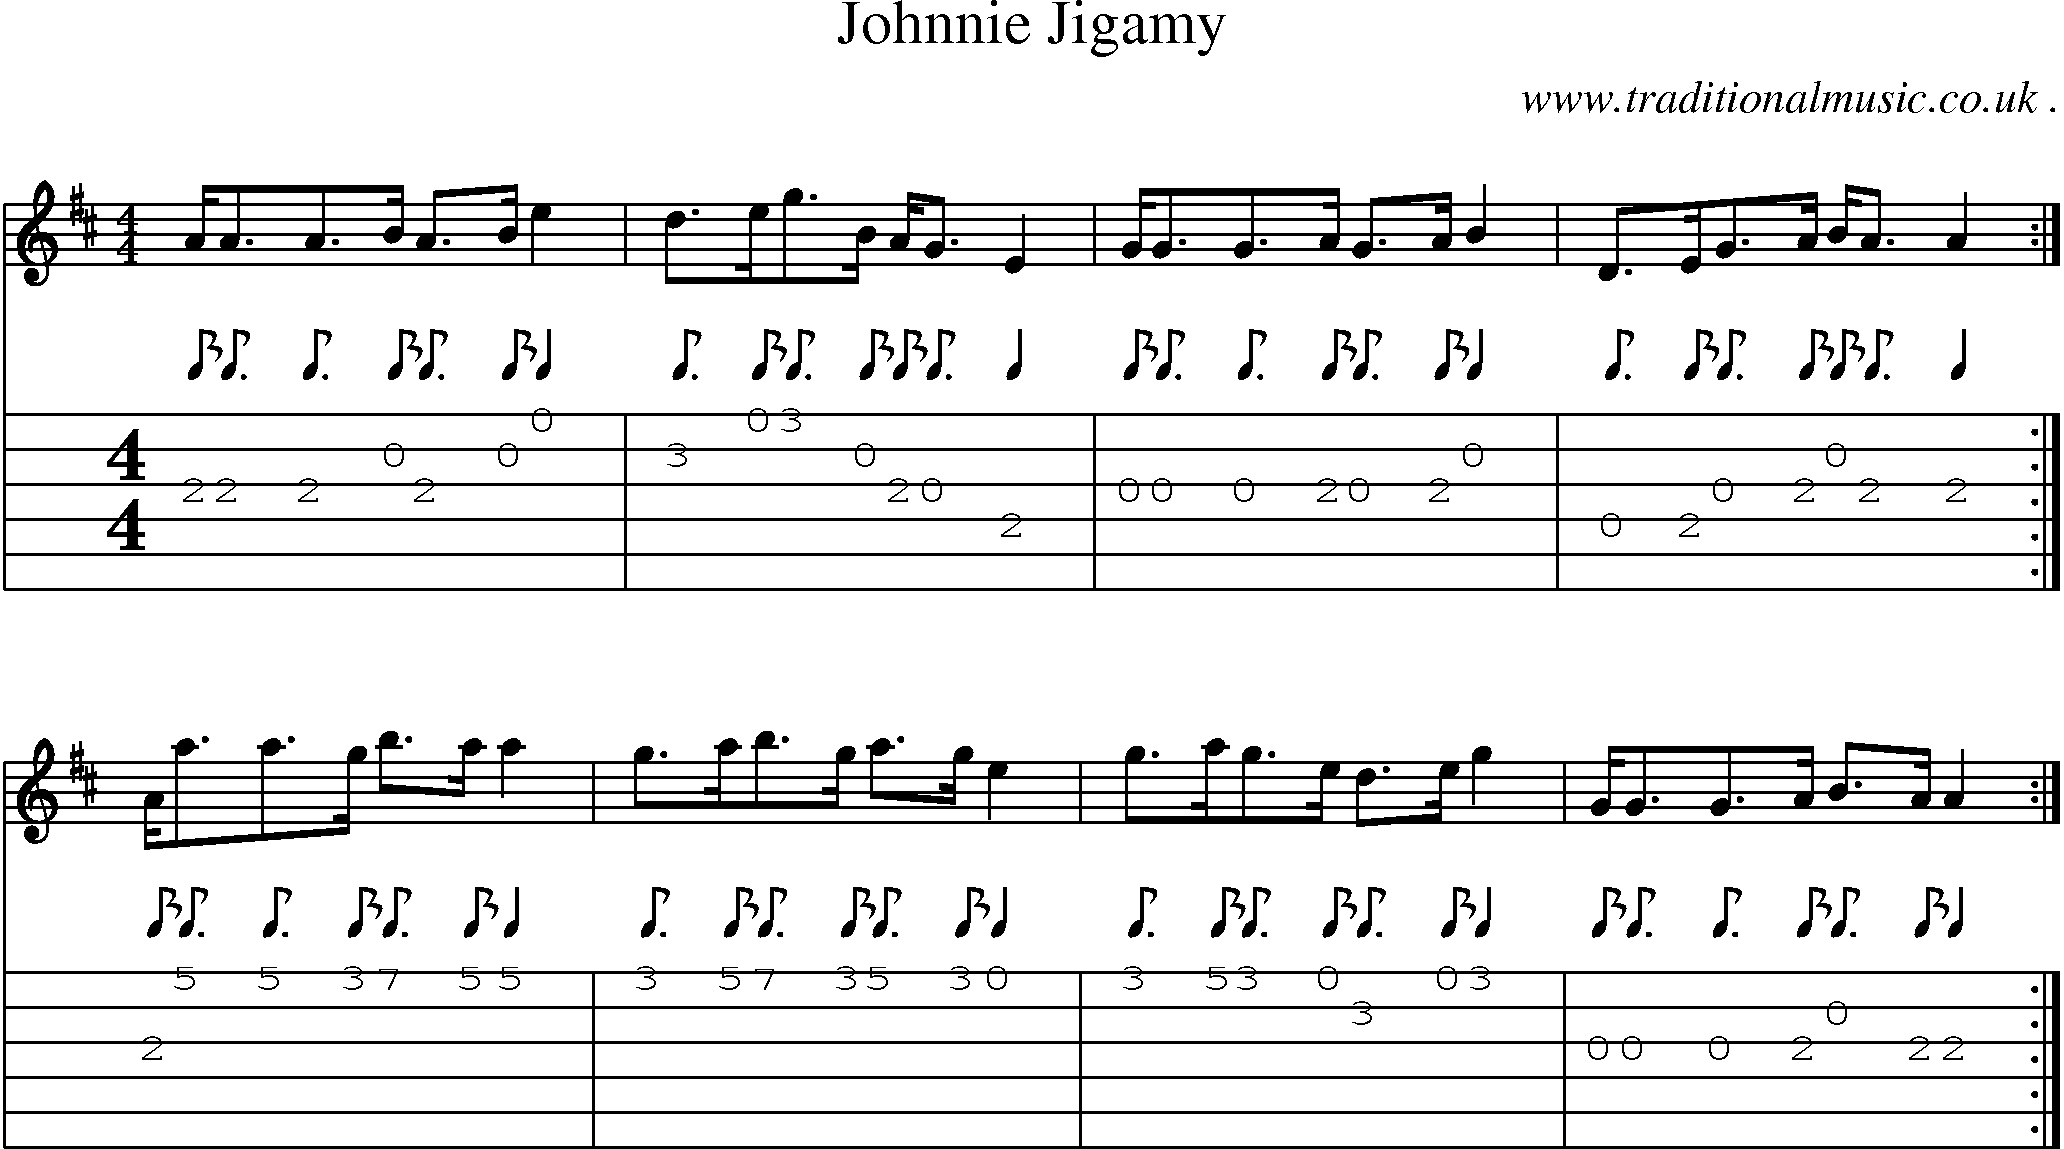 Sheet-music  score, Chords and Guitar Tabs for Johnnie Jigamy